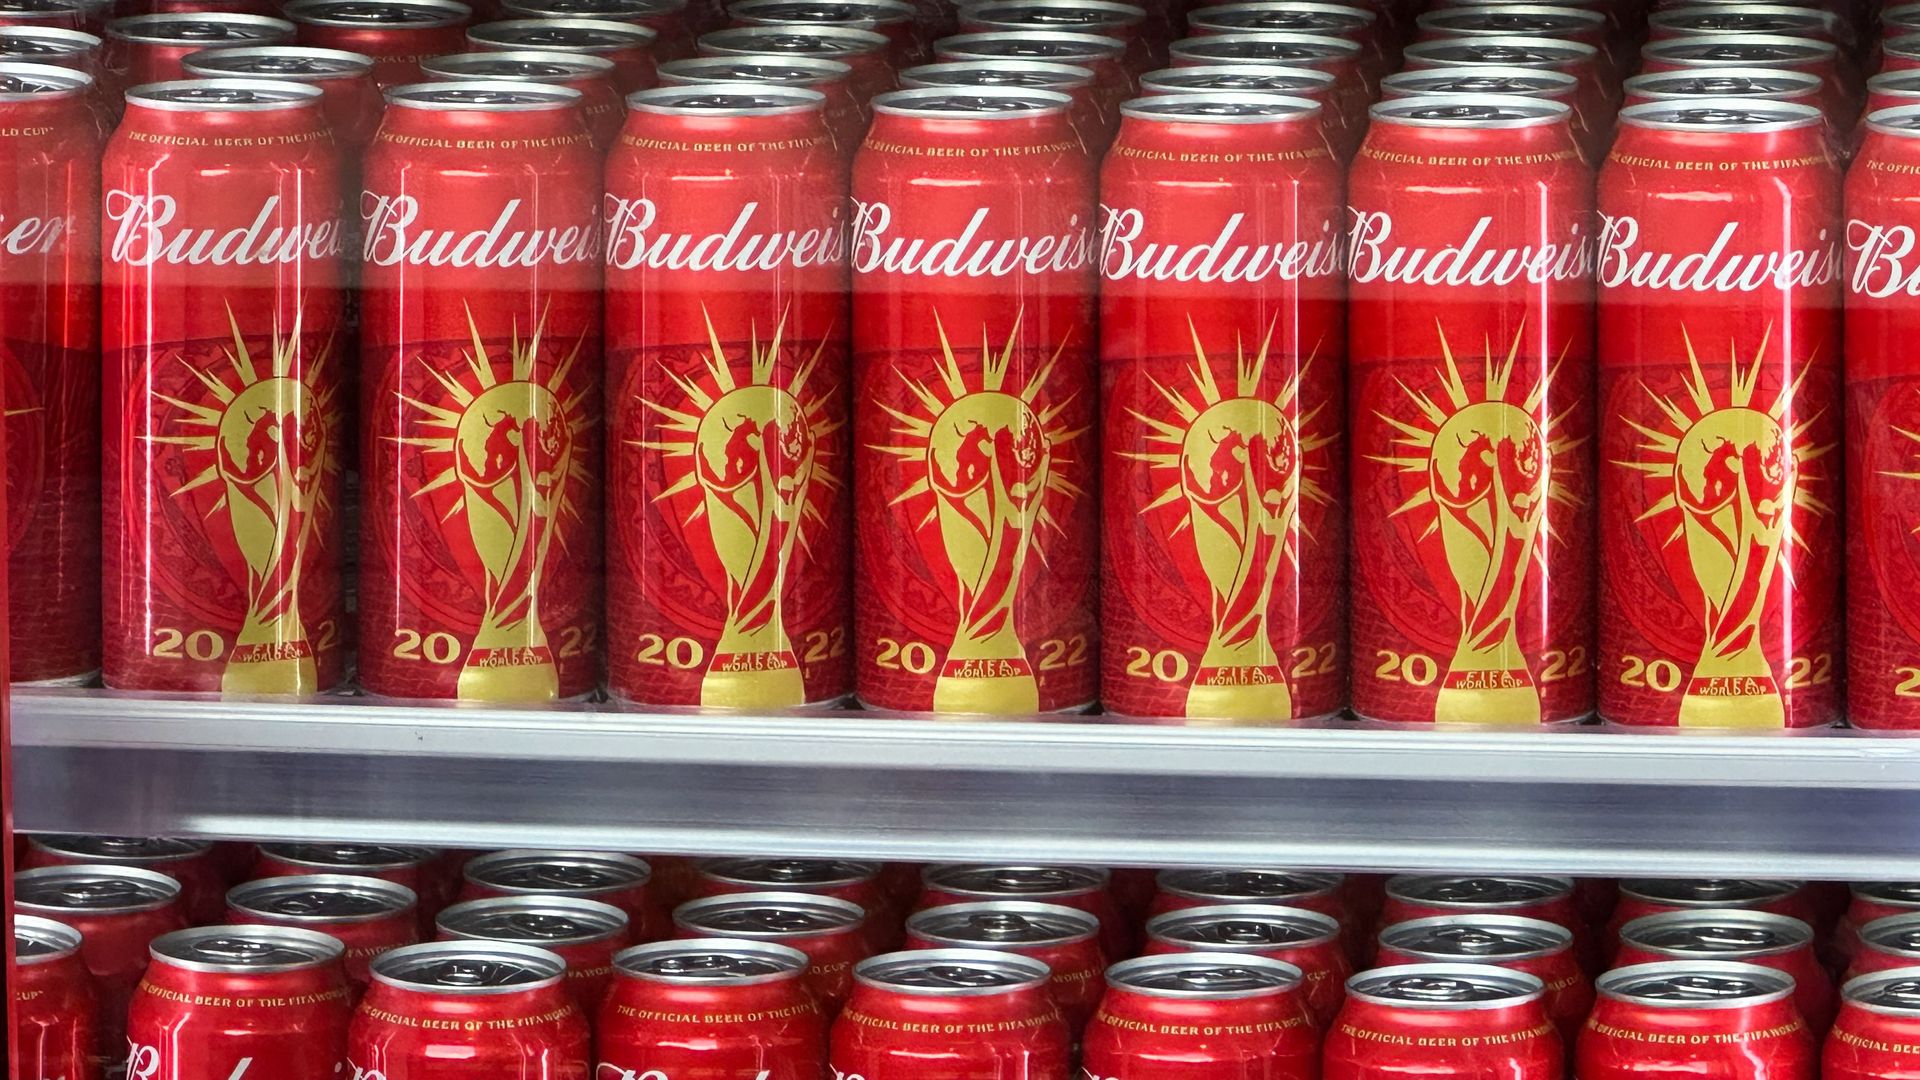 Cans of Budweiser beer featuring the FIFA World Cup logo on display in Doha on Friday.